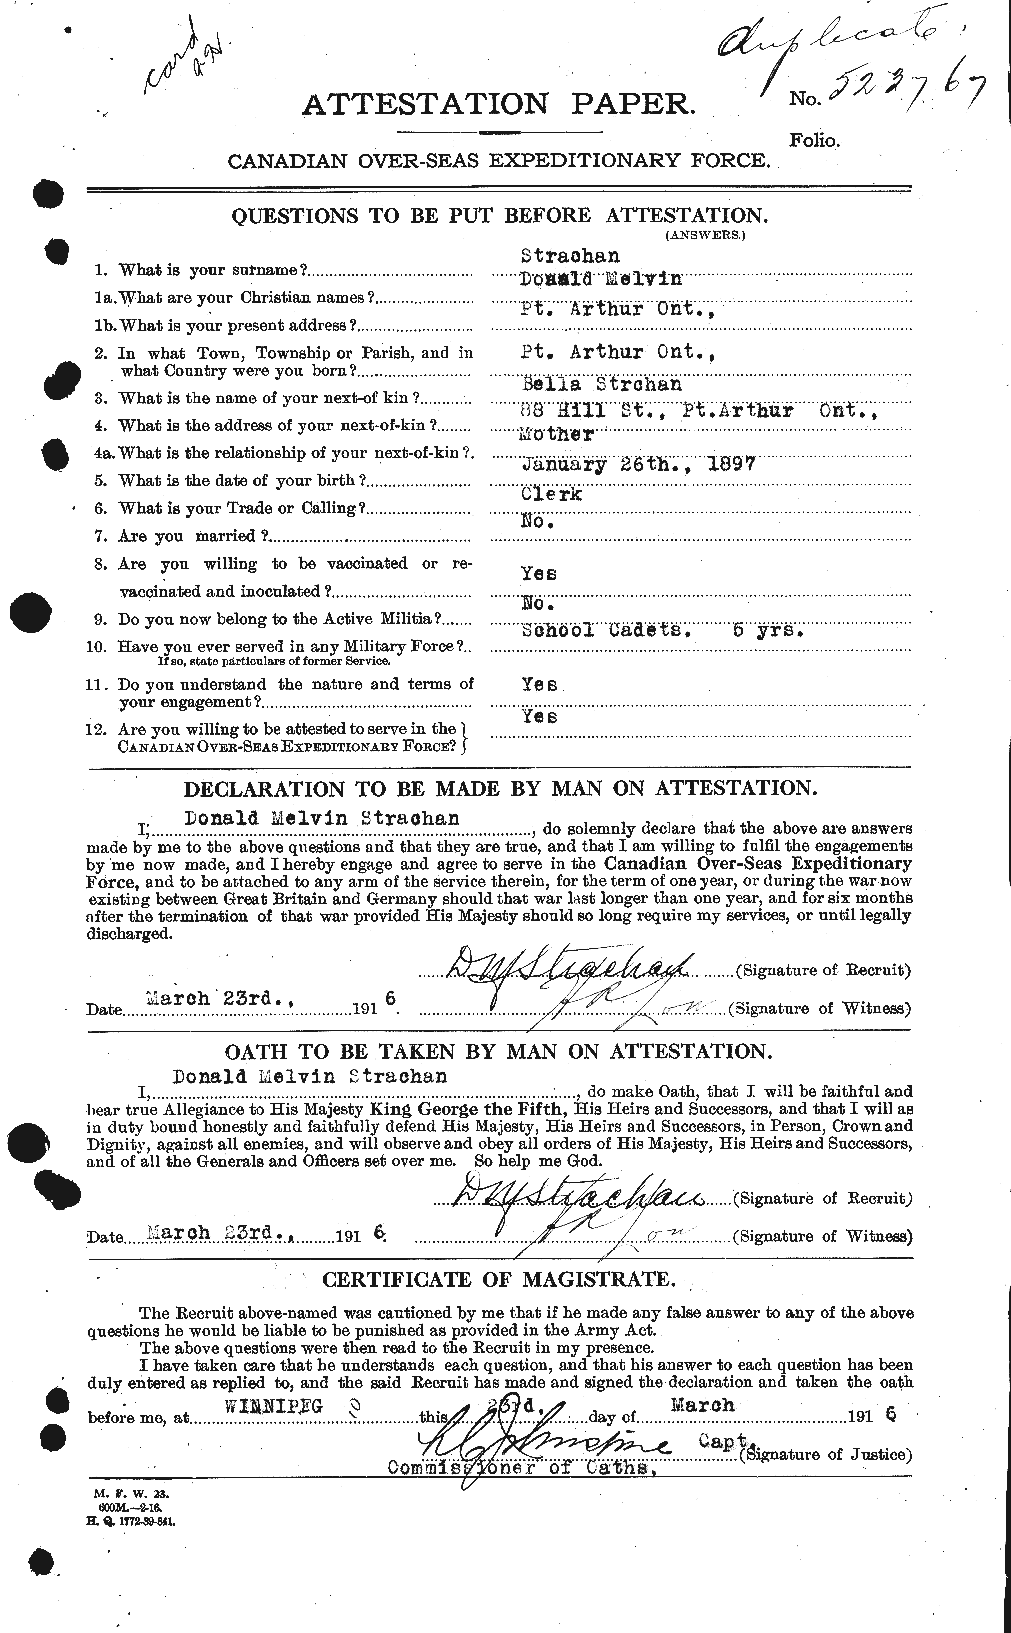 Personnel Records of the First World War - CEF 121788a